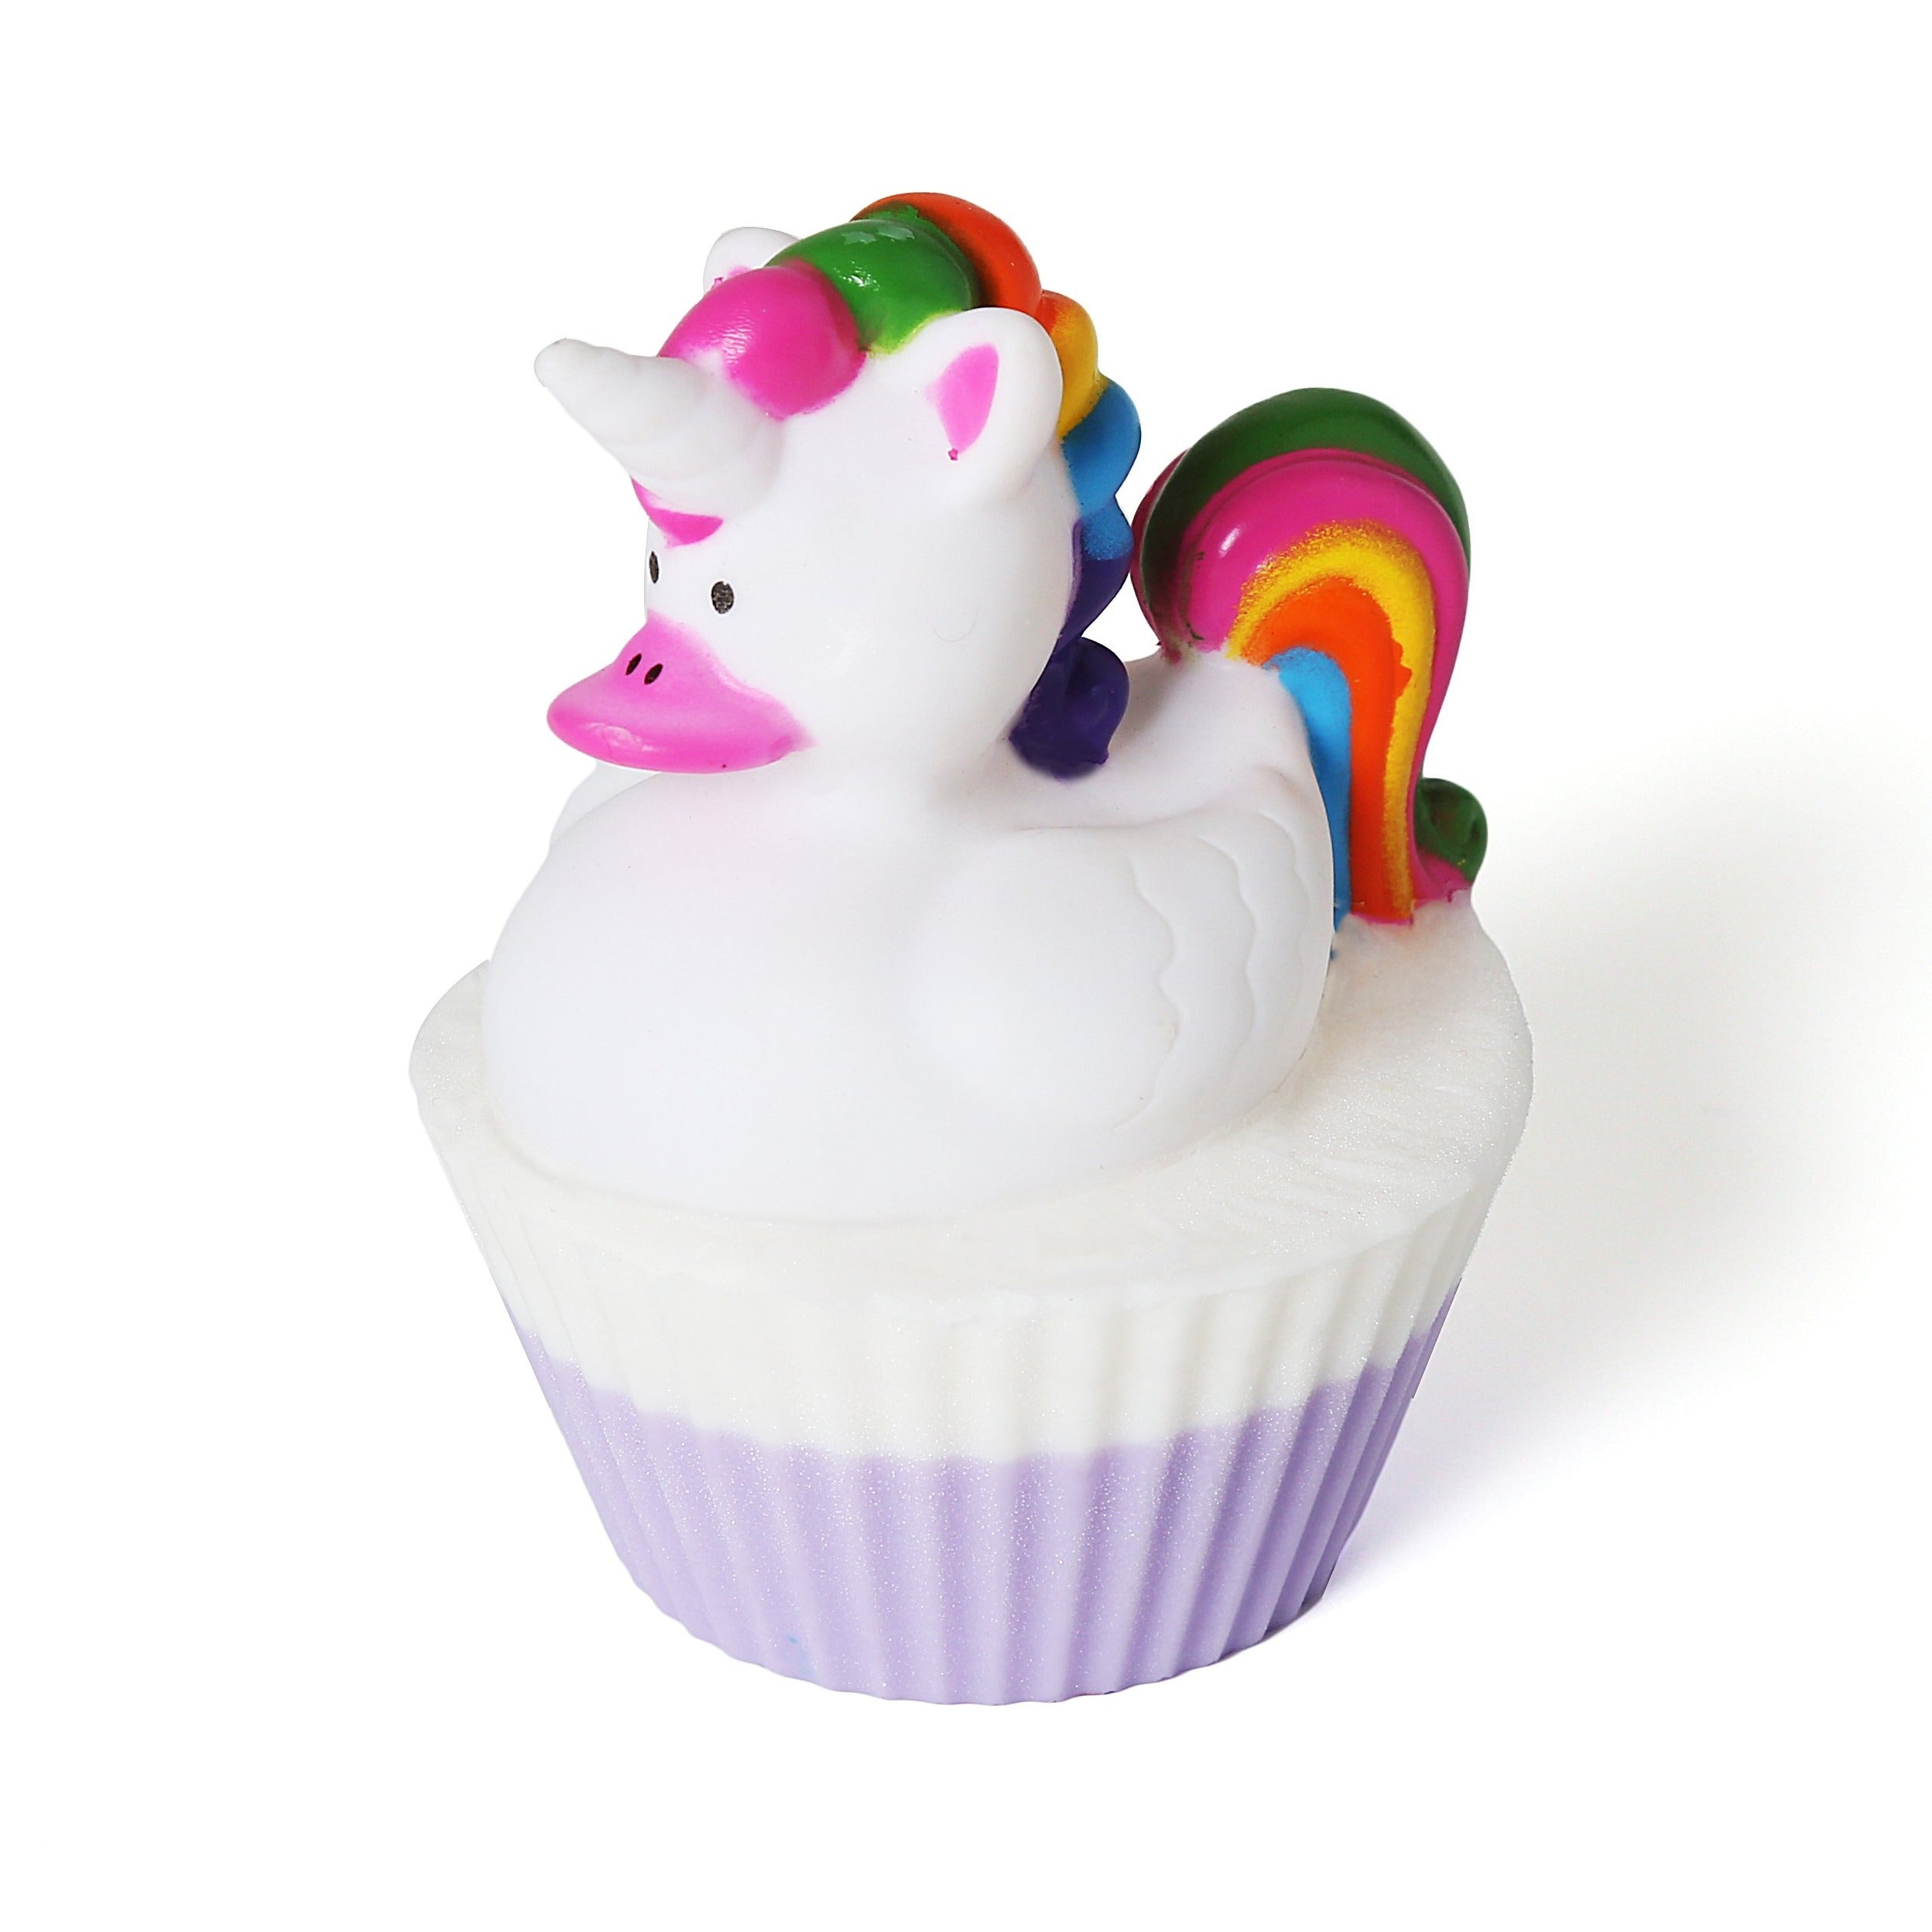 Round shaped soap with a light purple and white liner. Topped with a unicorn toy duck. Duck has a pink beak, white unicorn horn, and rainbow hair.